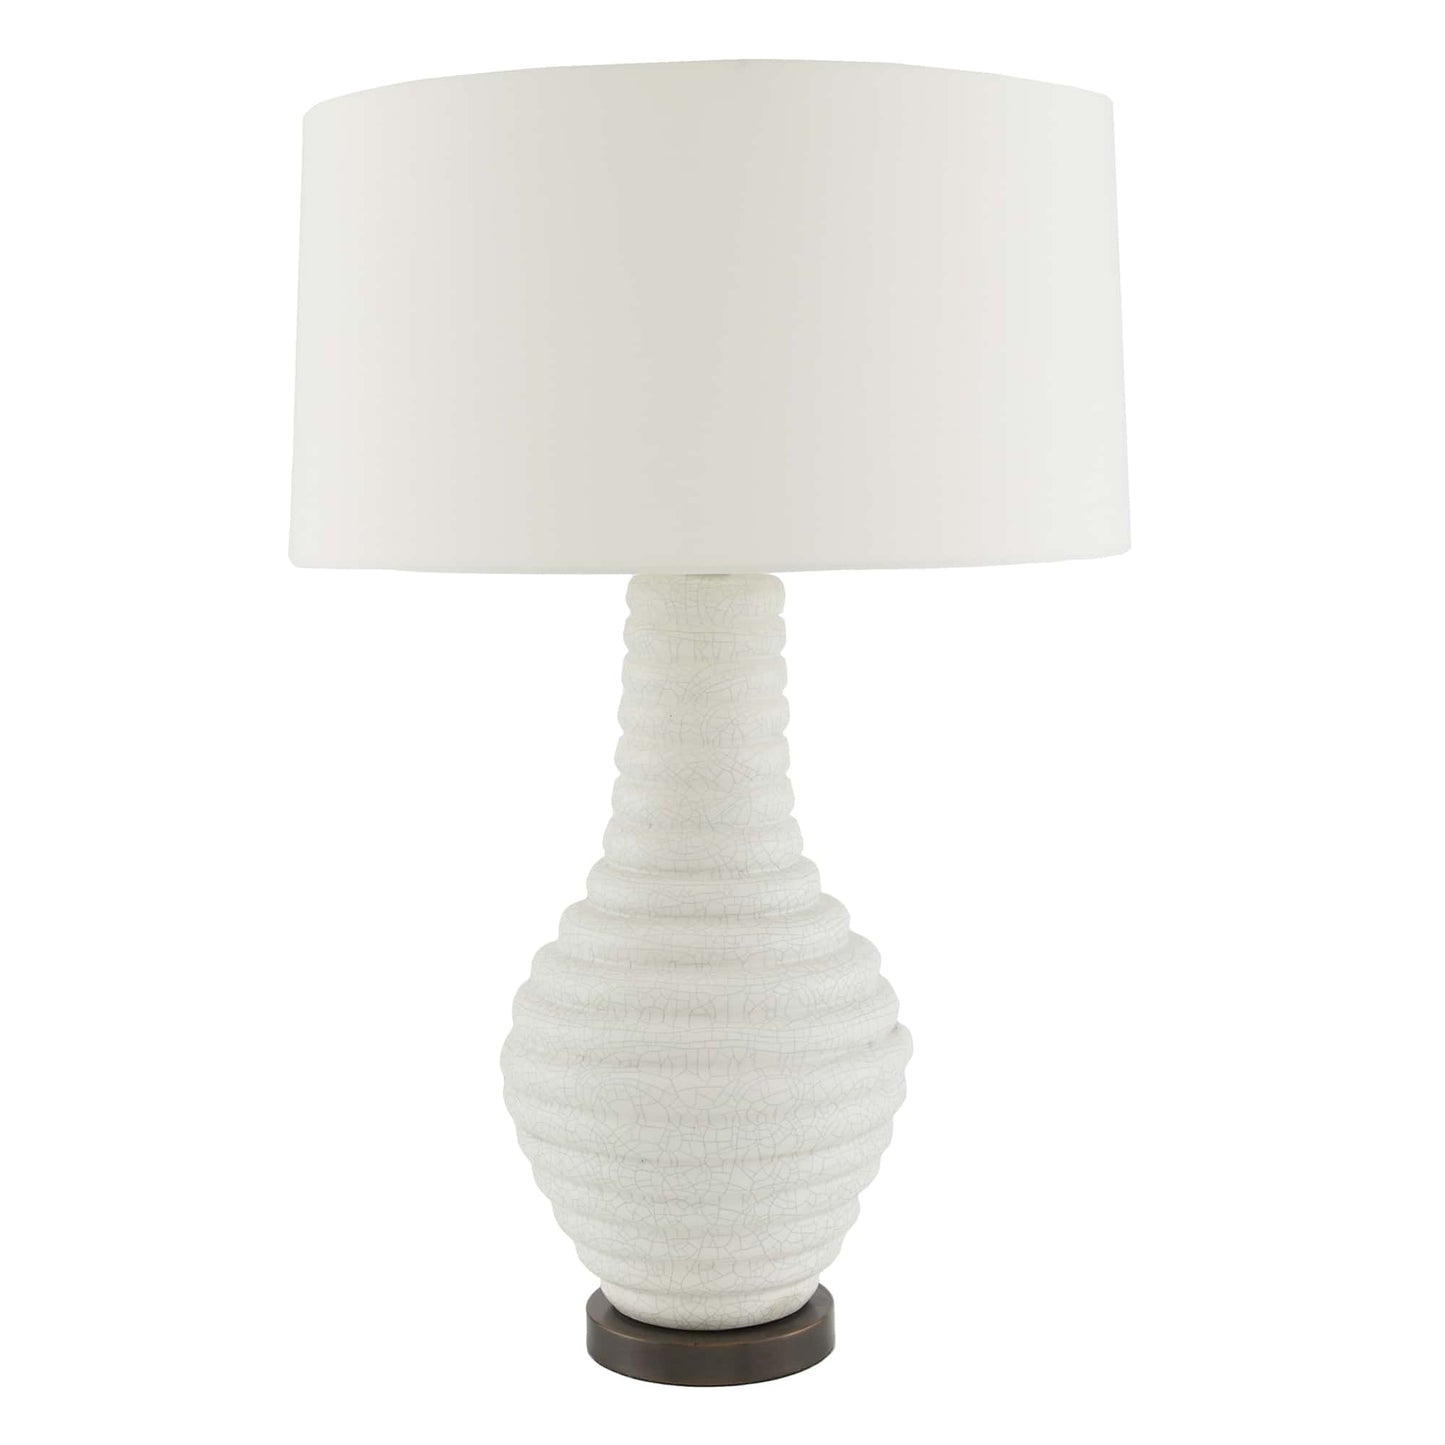 Bartoli Lamp - Timeless Elegance in Antique Brass and Off-White Finish